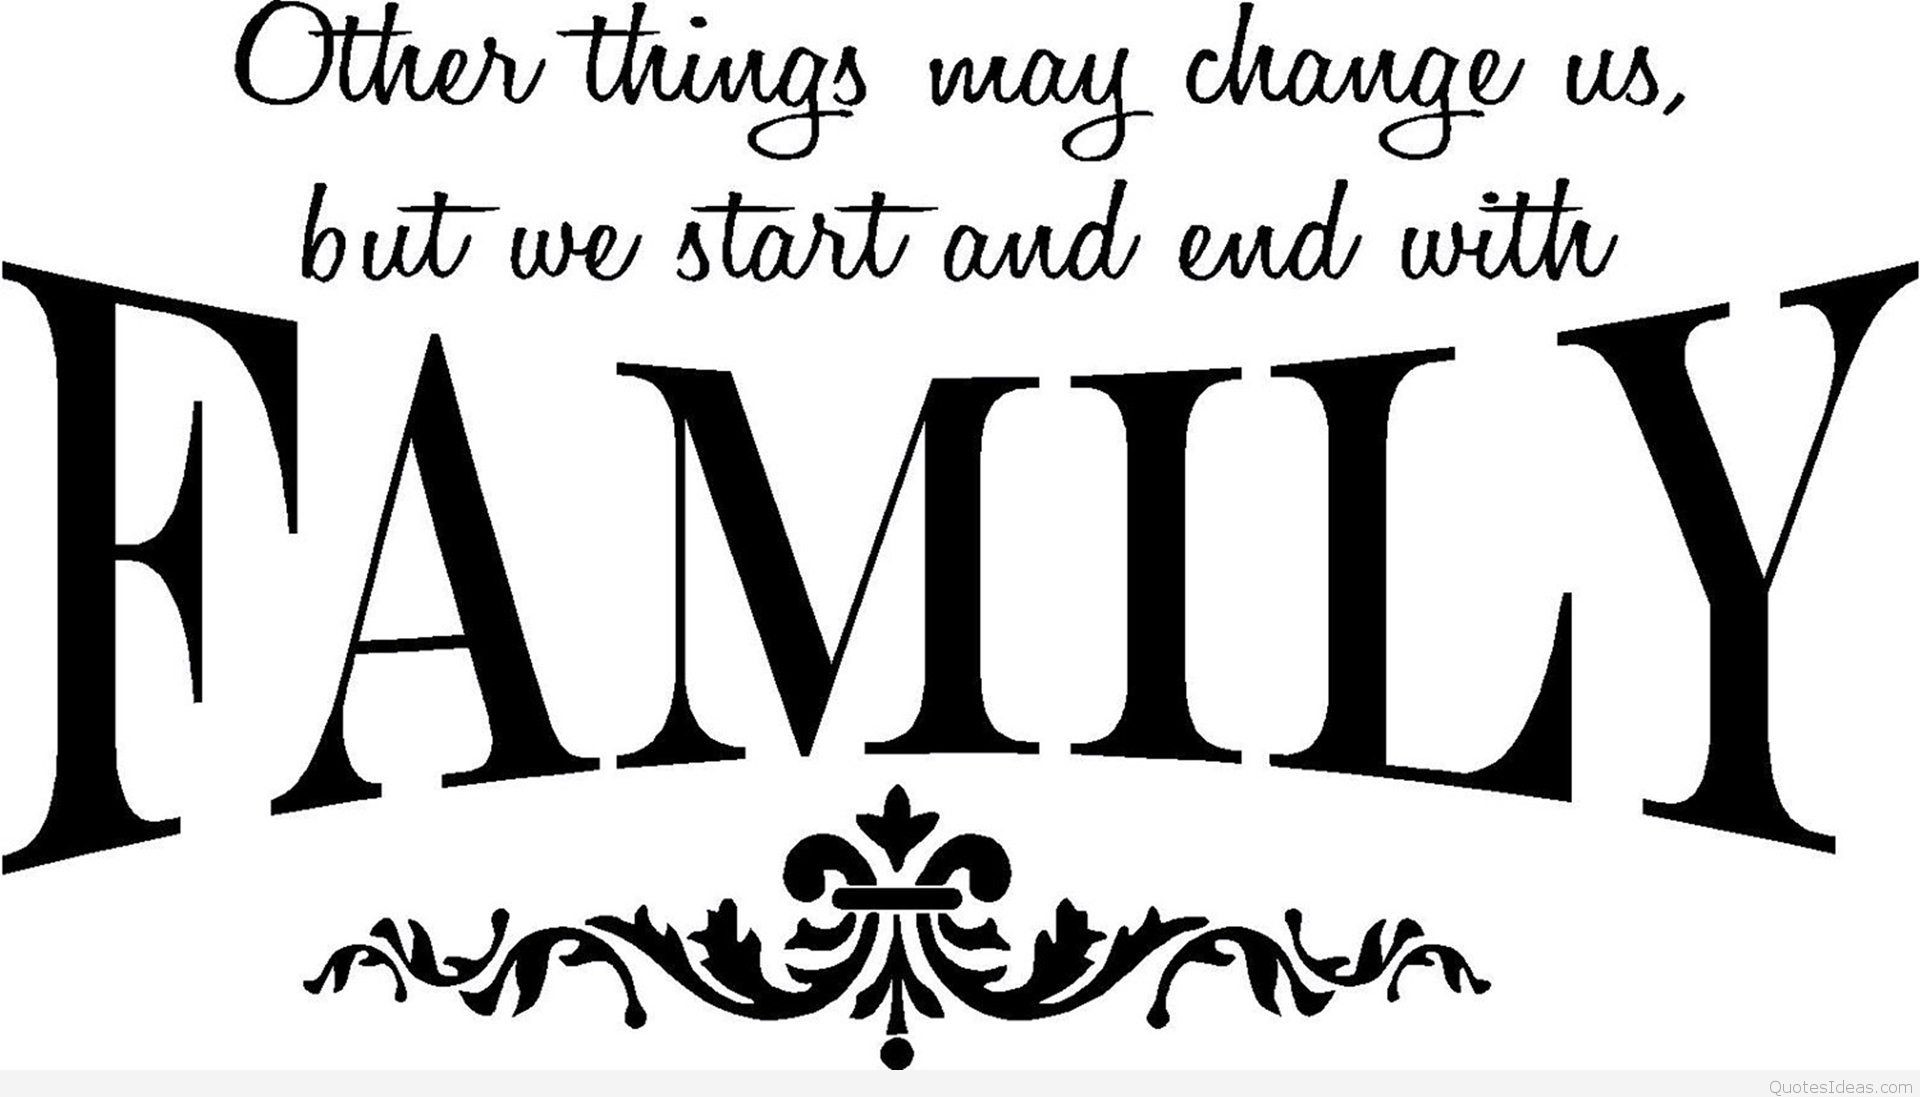 Inspirational Family Quotes
 Cute cover family quote 2015 inspiring